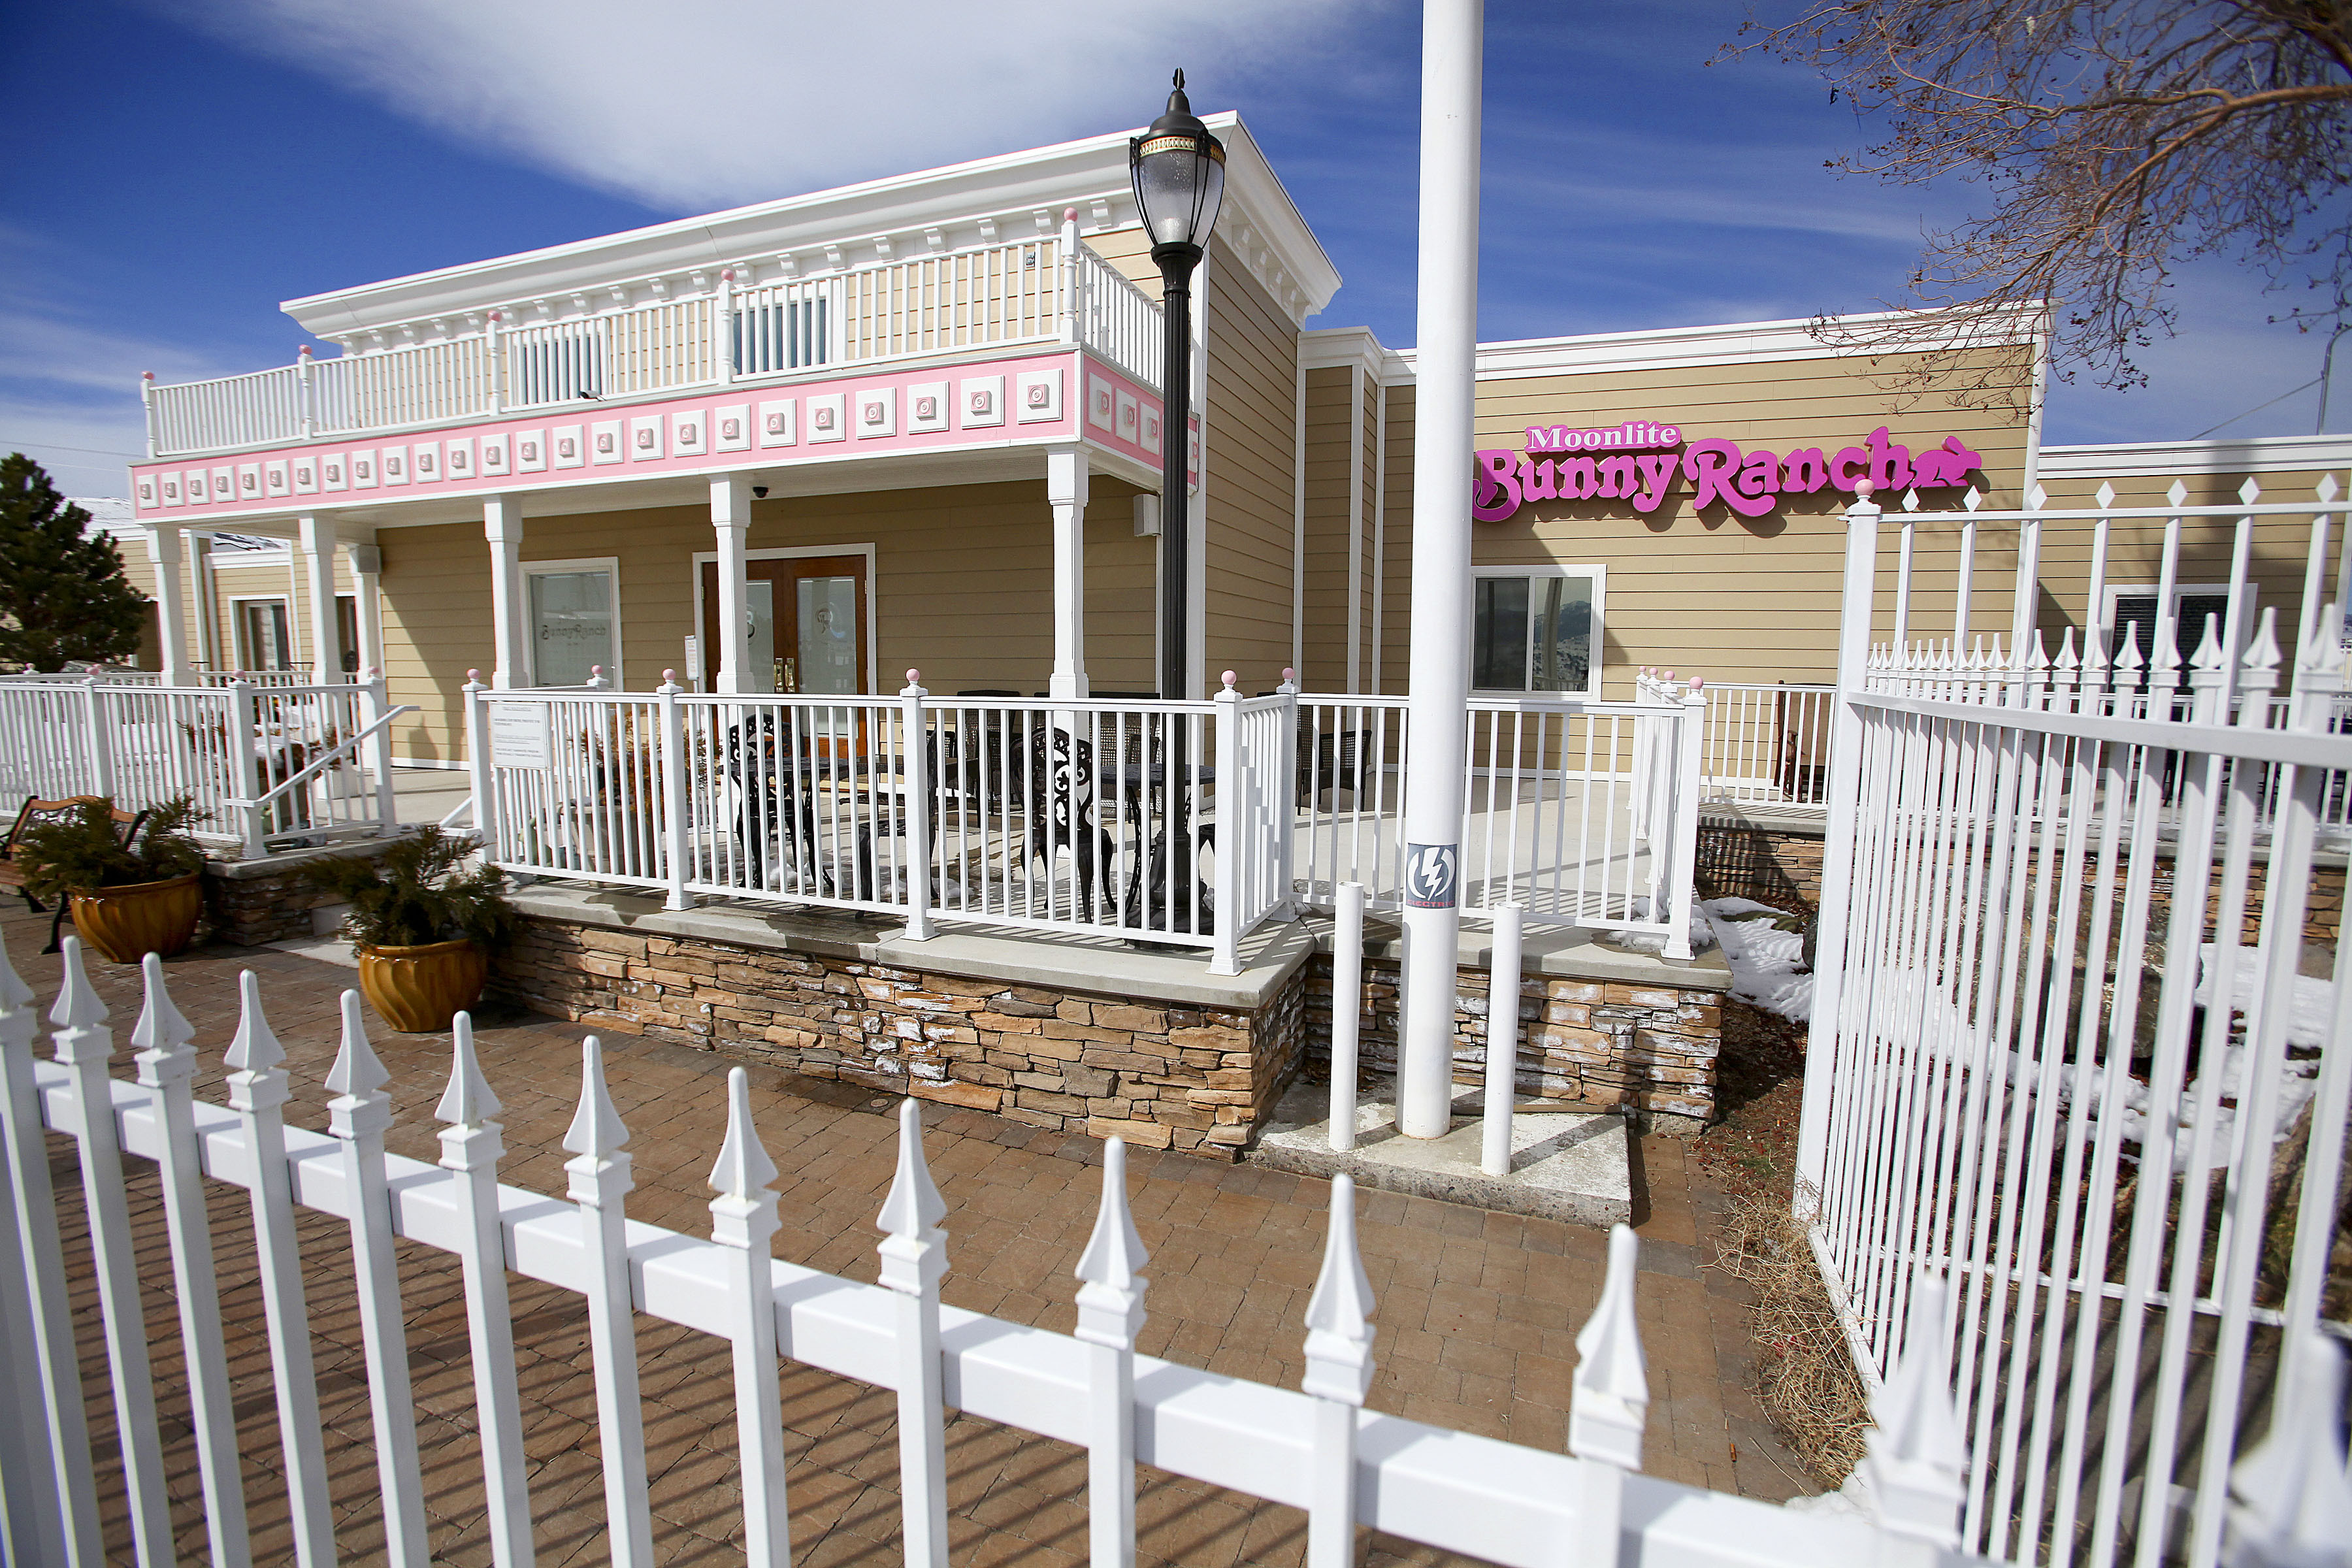 brennan buck recommends Cost Of Bunny Ranch